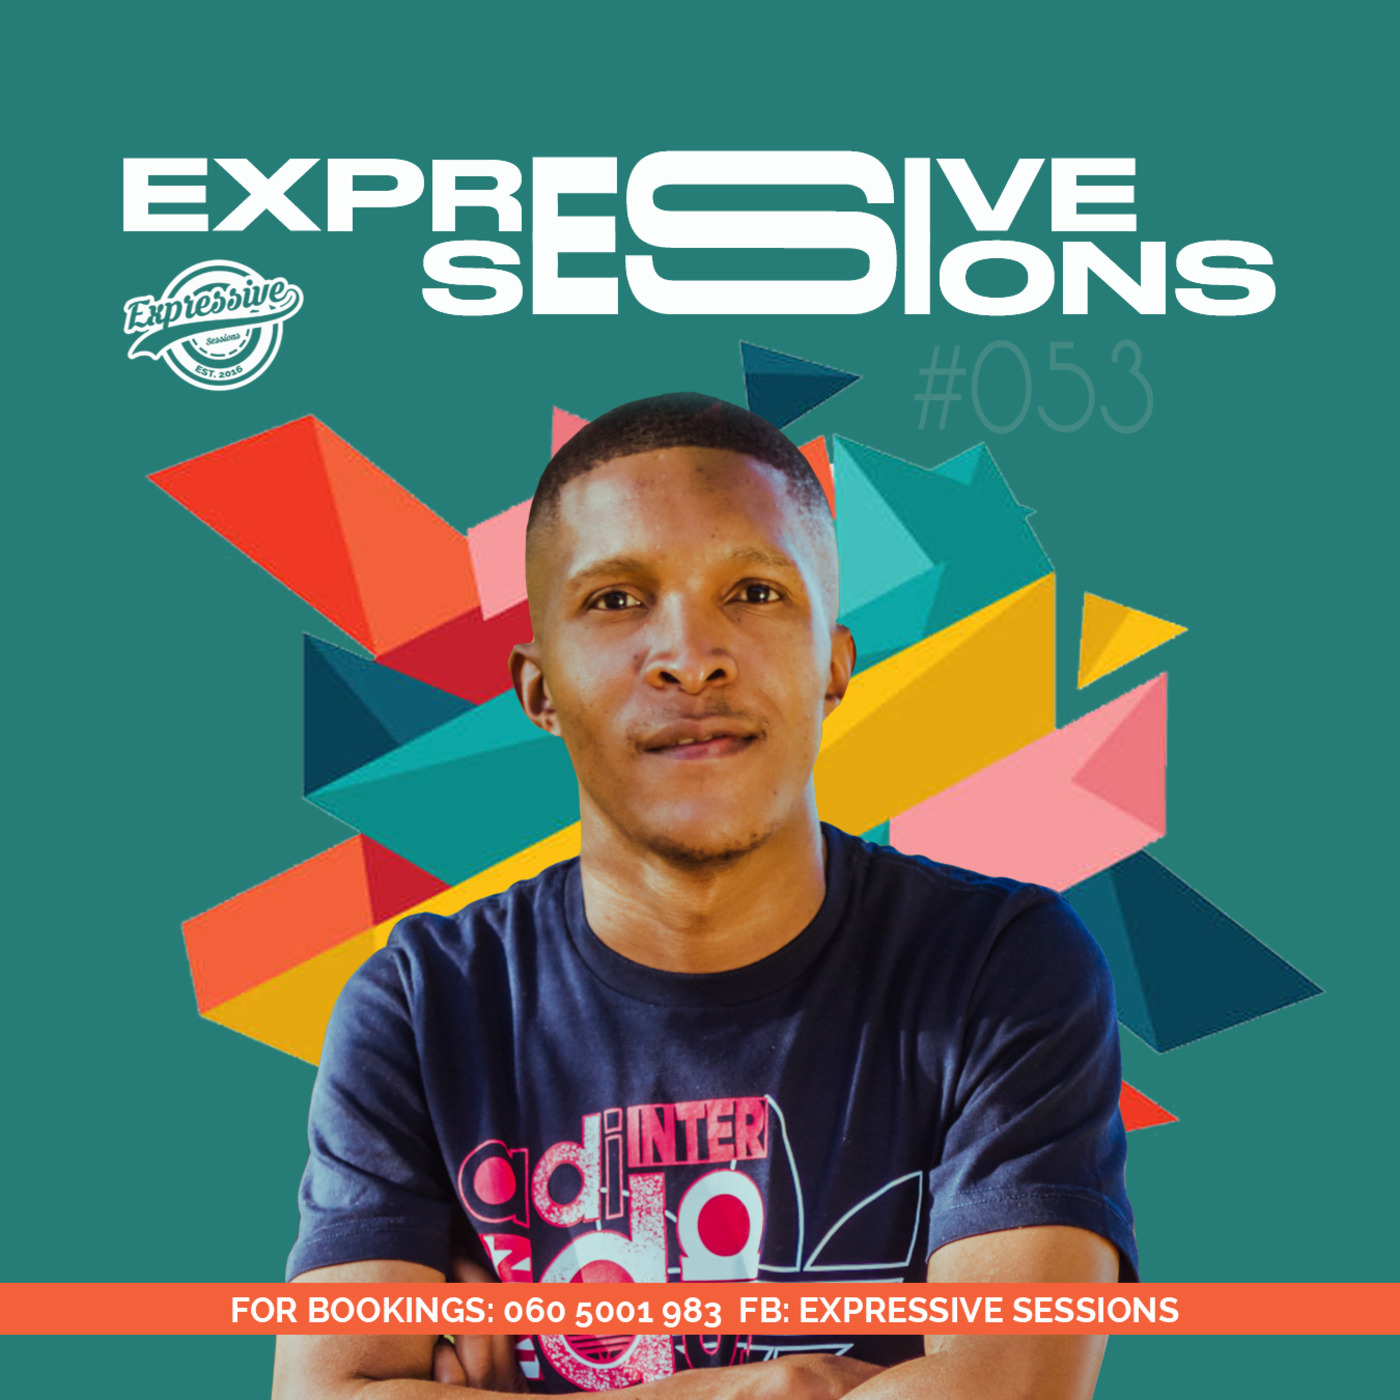 Expressive Sessions #53 by Benni Exclusive